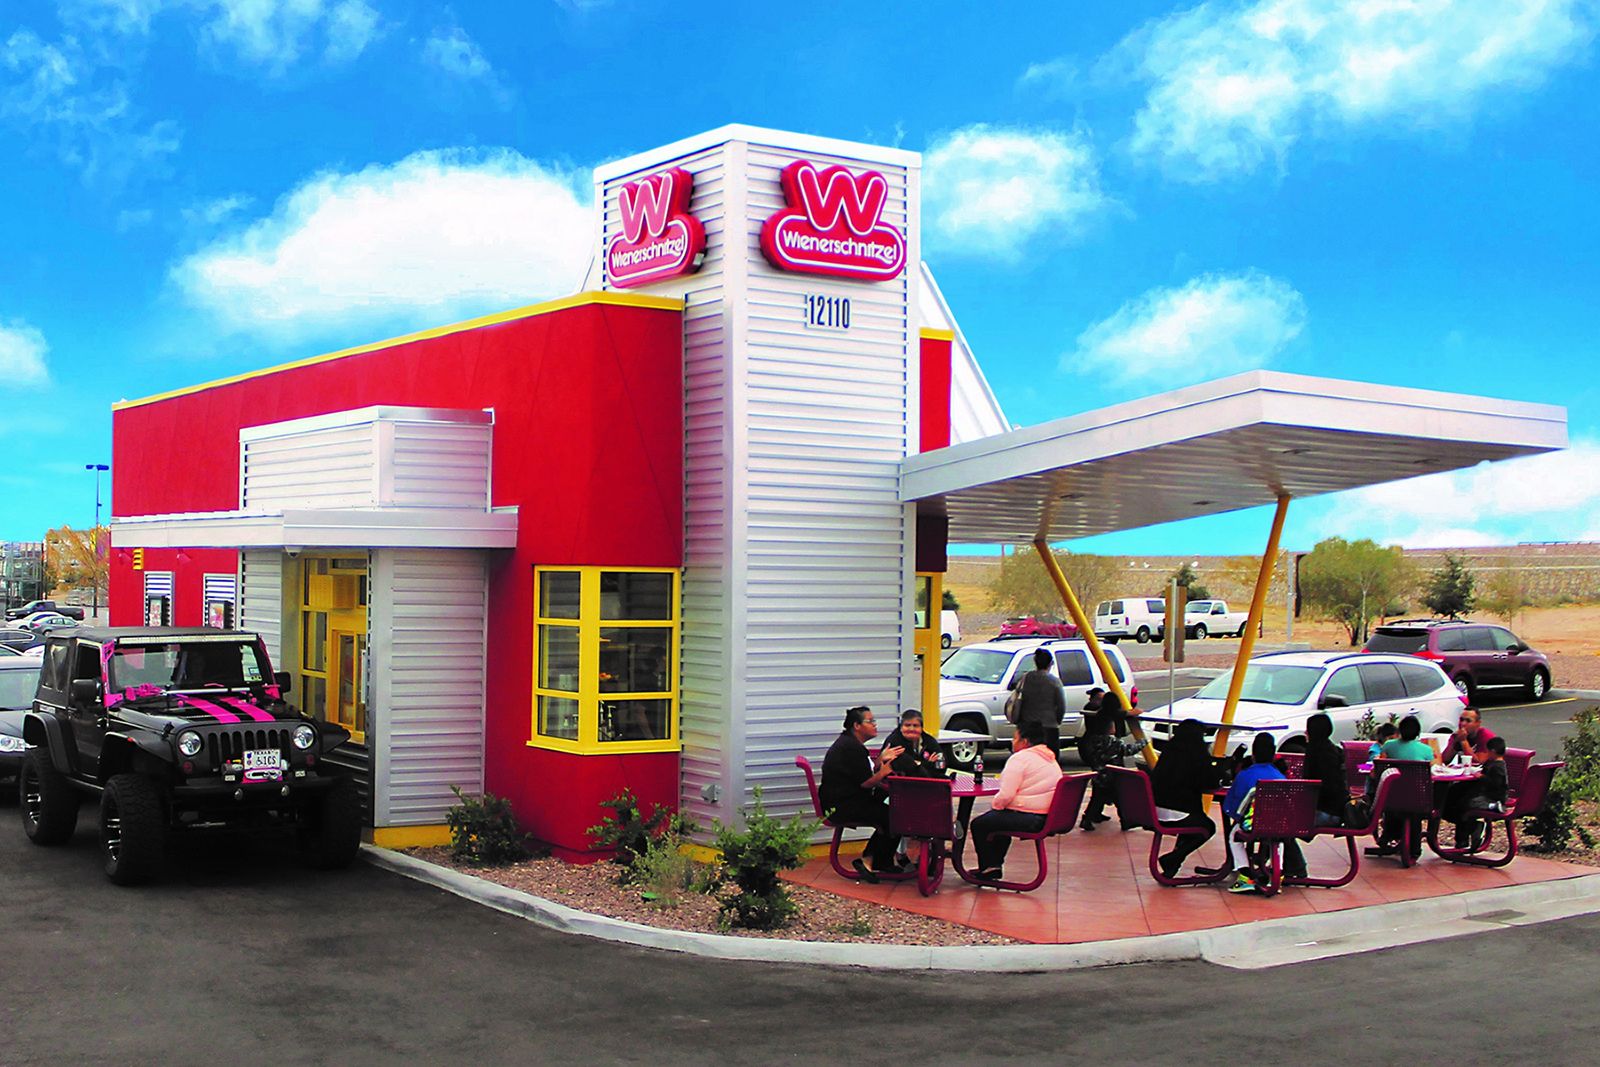 On the heels of record-breaking same-store sales in 2021 and Q1 2021, Wienerschnitzel sets sights on Midwest expansion.